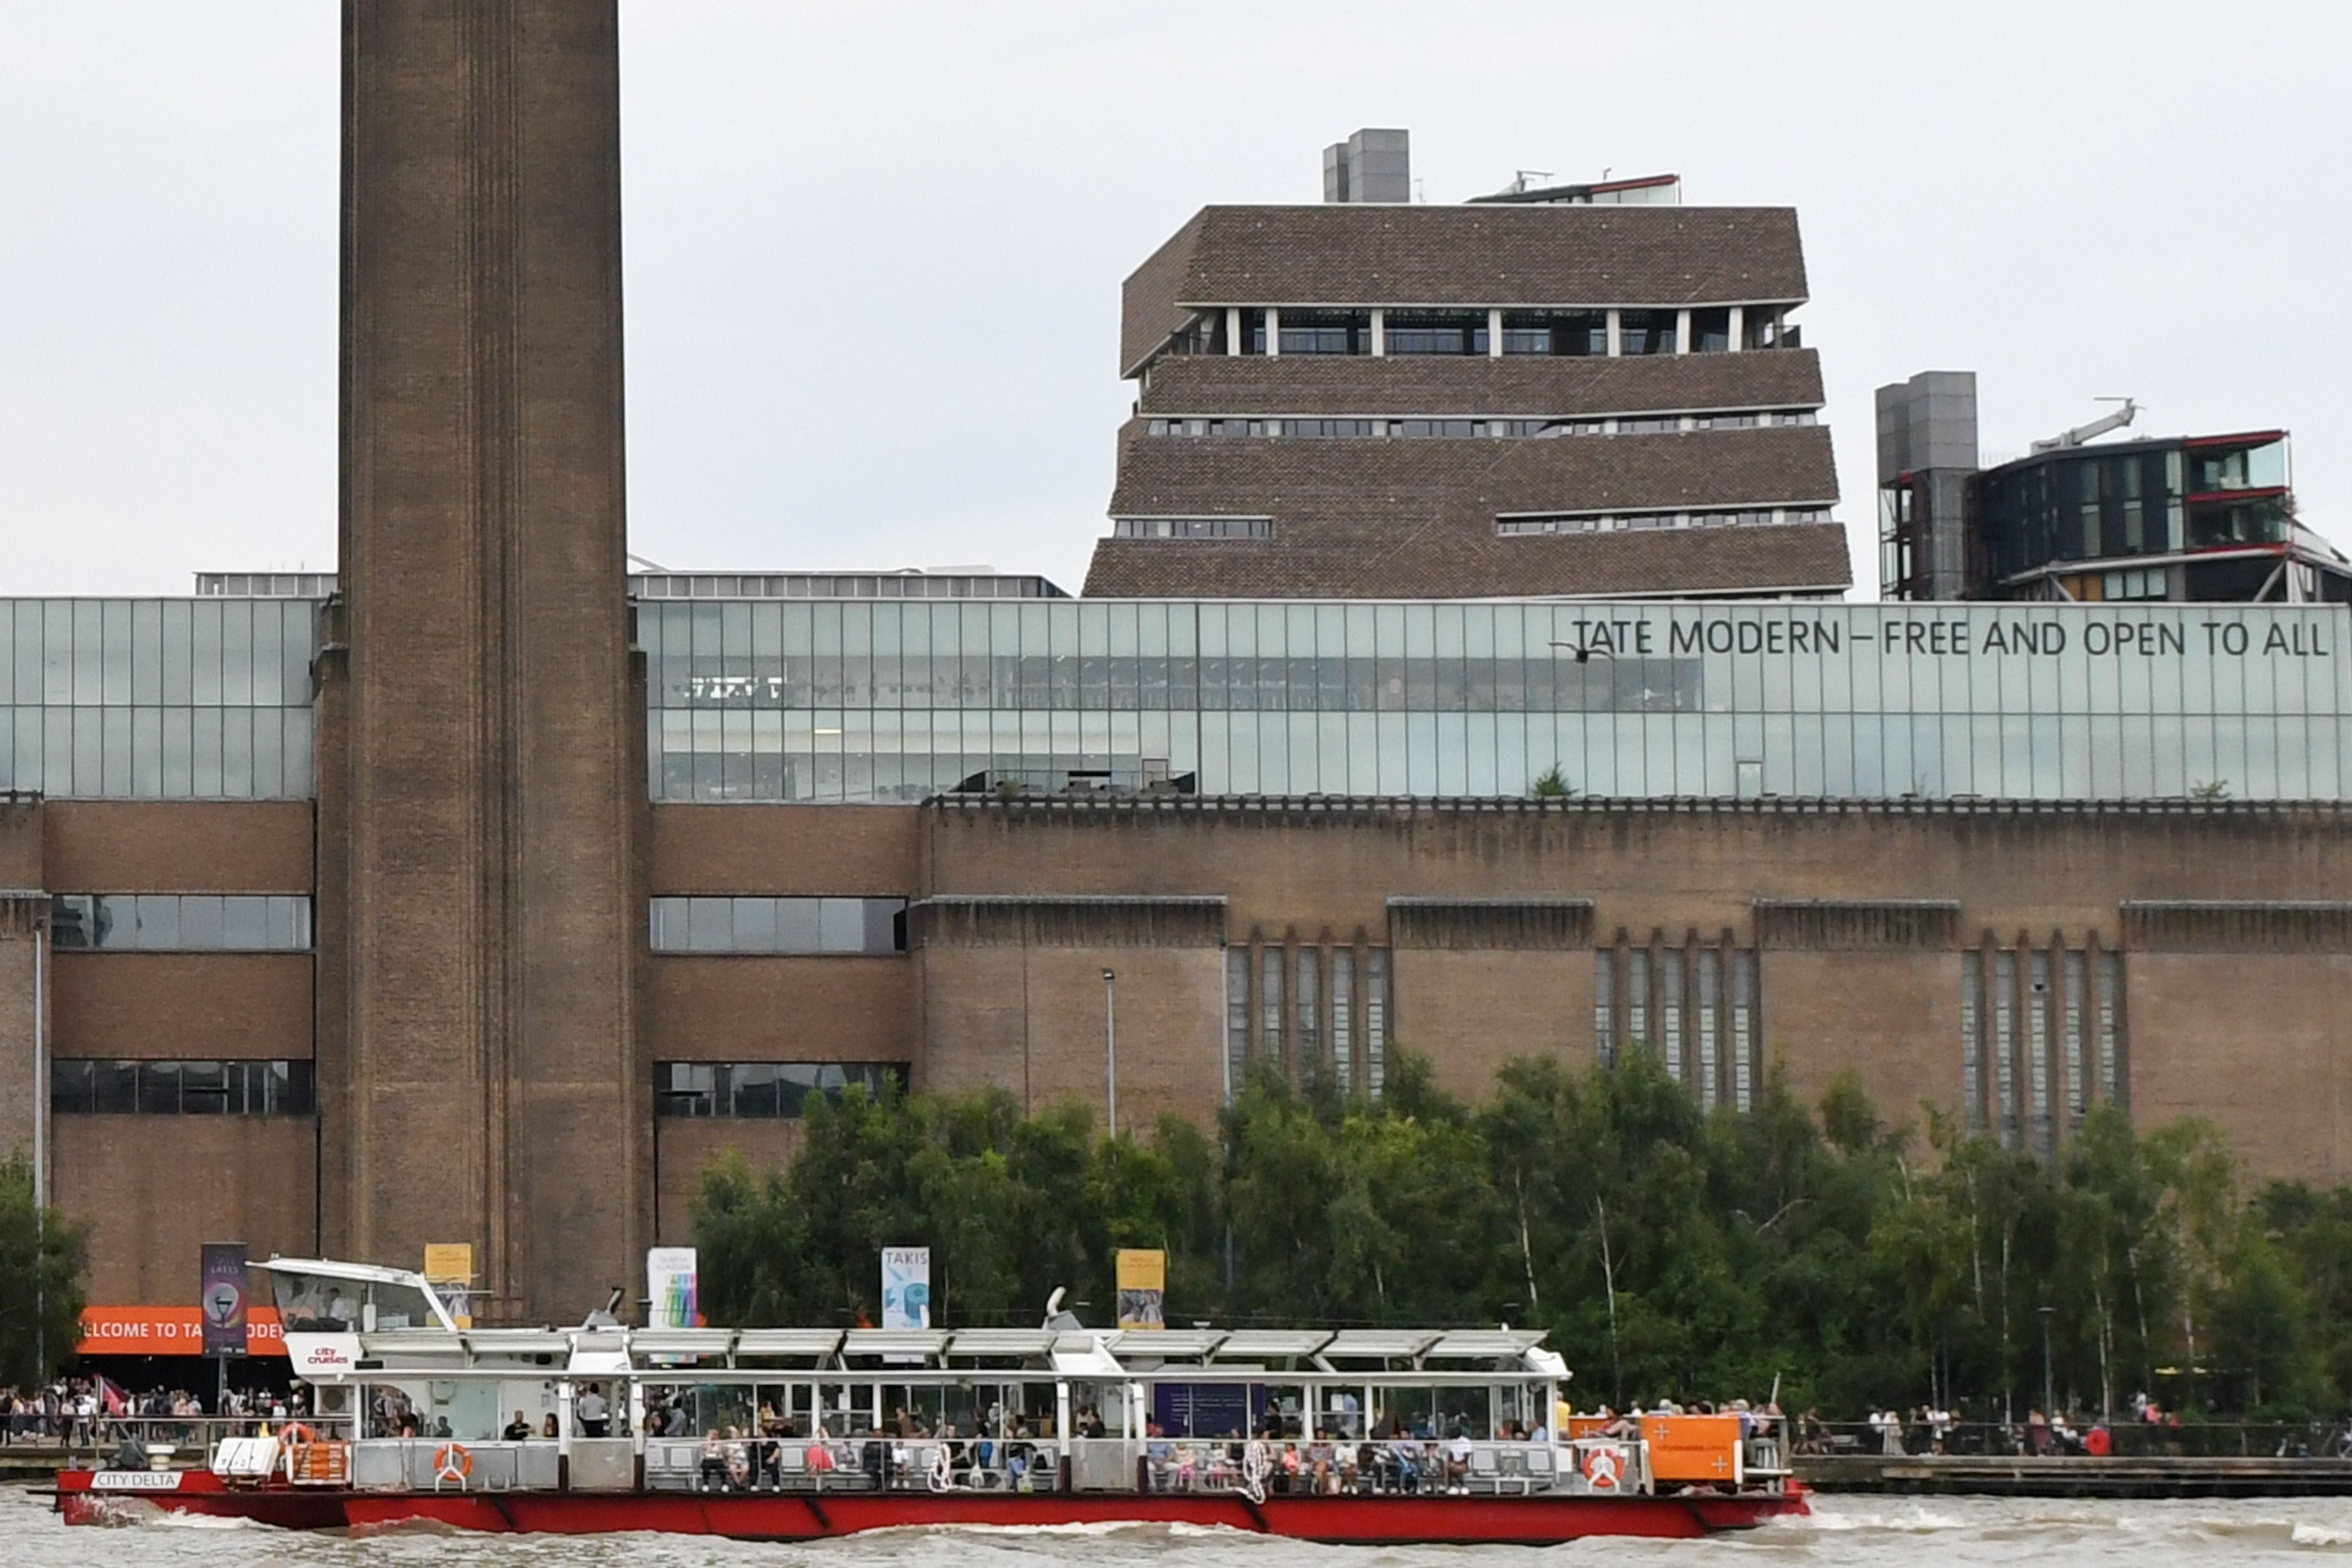 A view outside the Tate Modern art gallery in south London